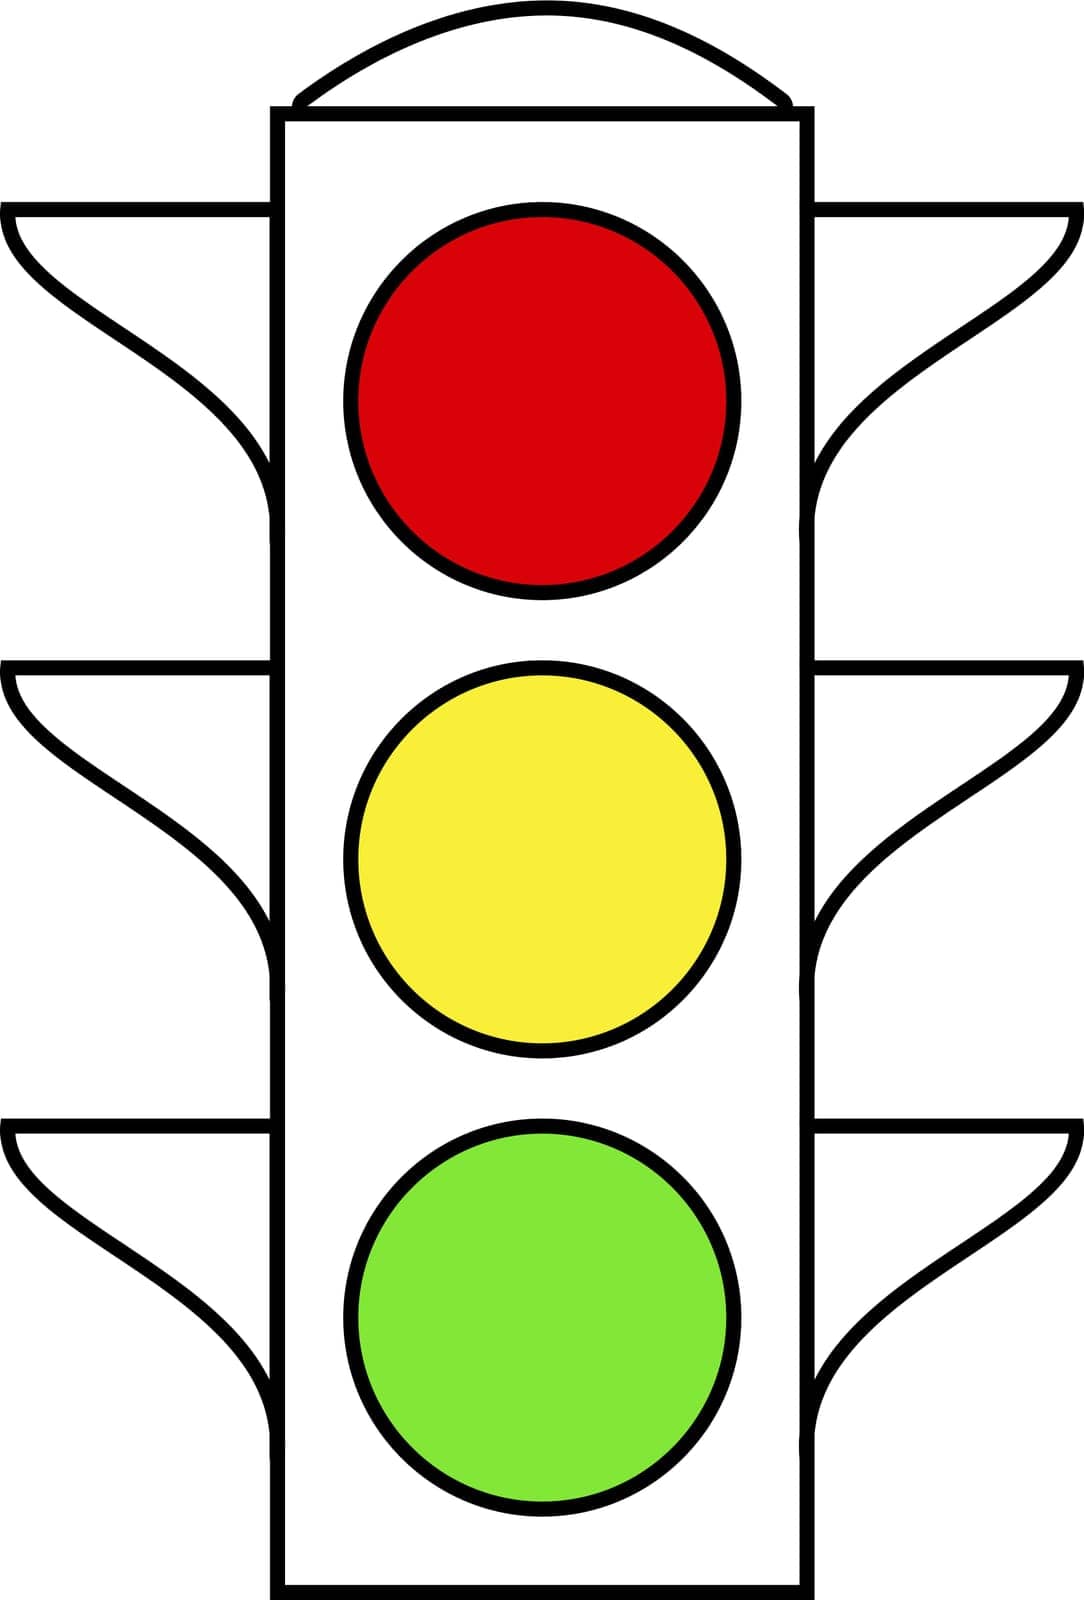 Traffic light interface icons Red, yellow green yes, no